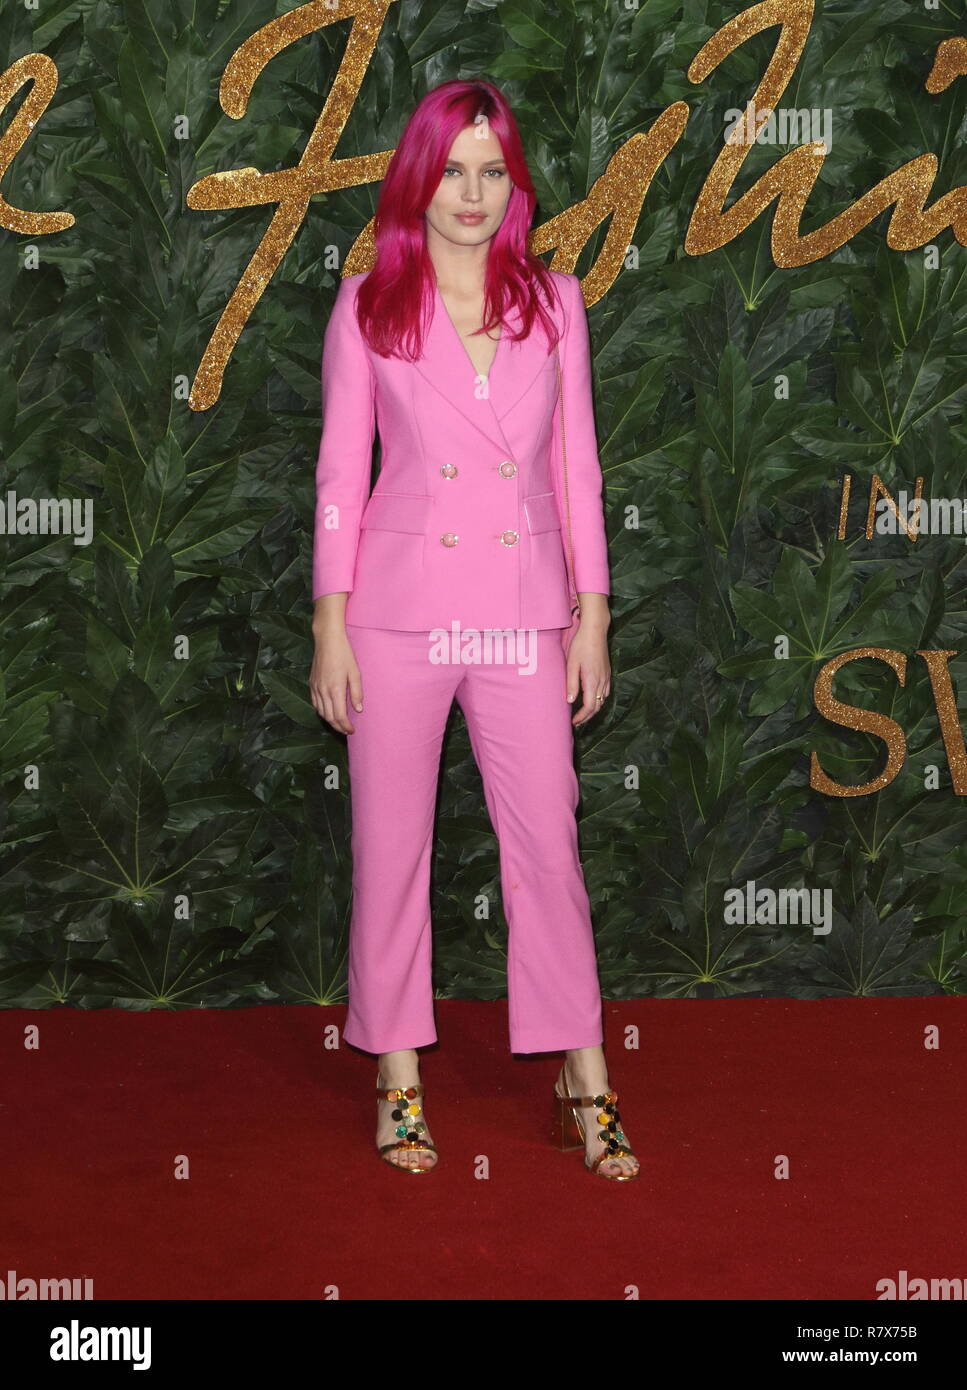 Georgia May Jagger seen on the red carpet during the Fashion Awards 2018 at the Royal Albert Hall, Kensington in London. Stock Photo